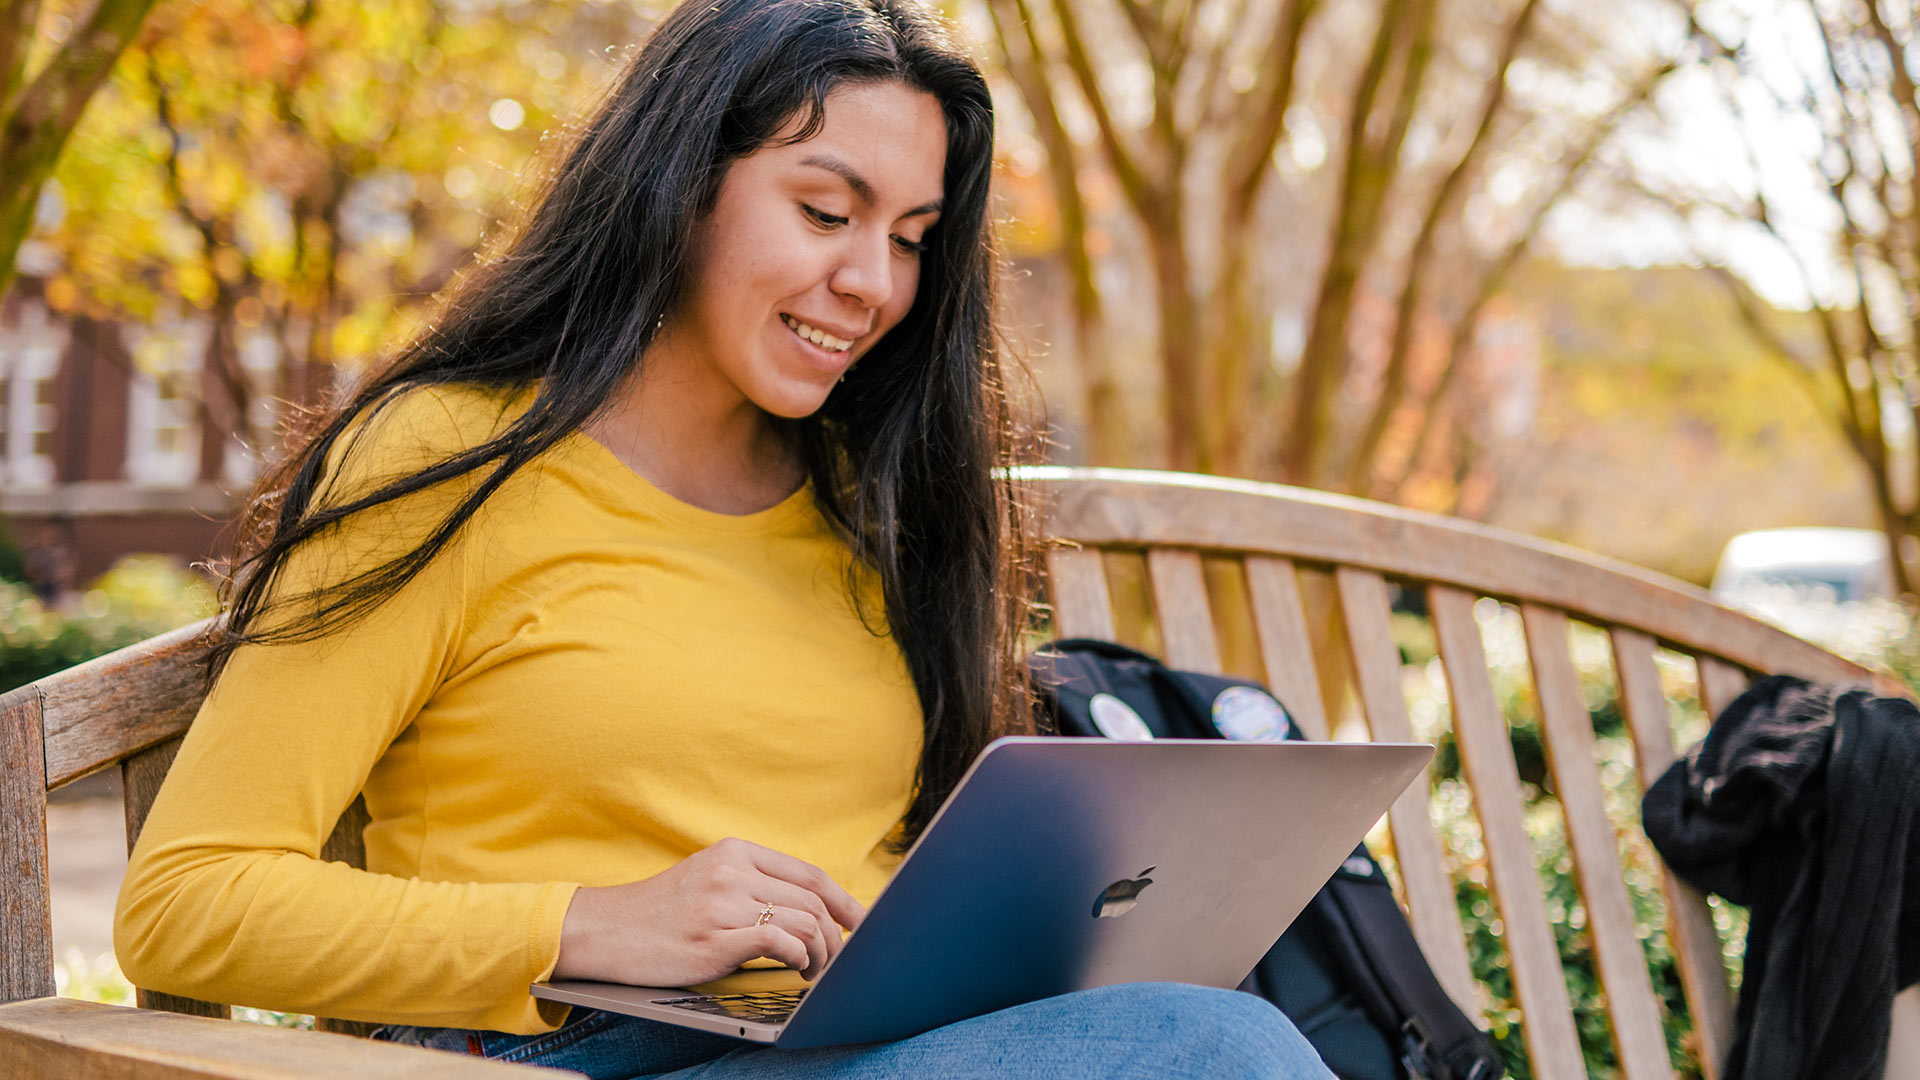 A student seated on an outdoor bench smiles as she views a laptop screen.